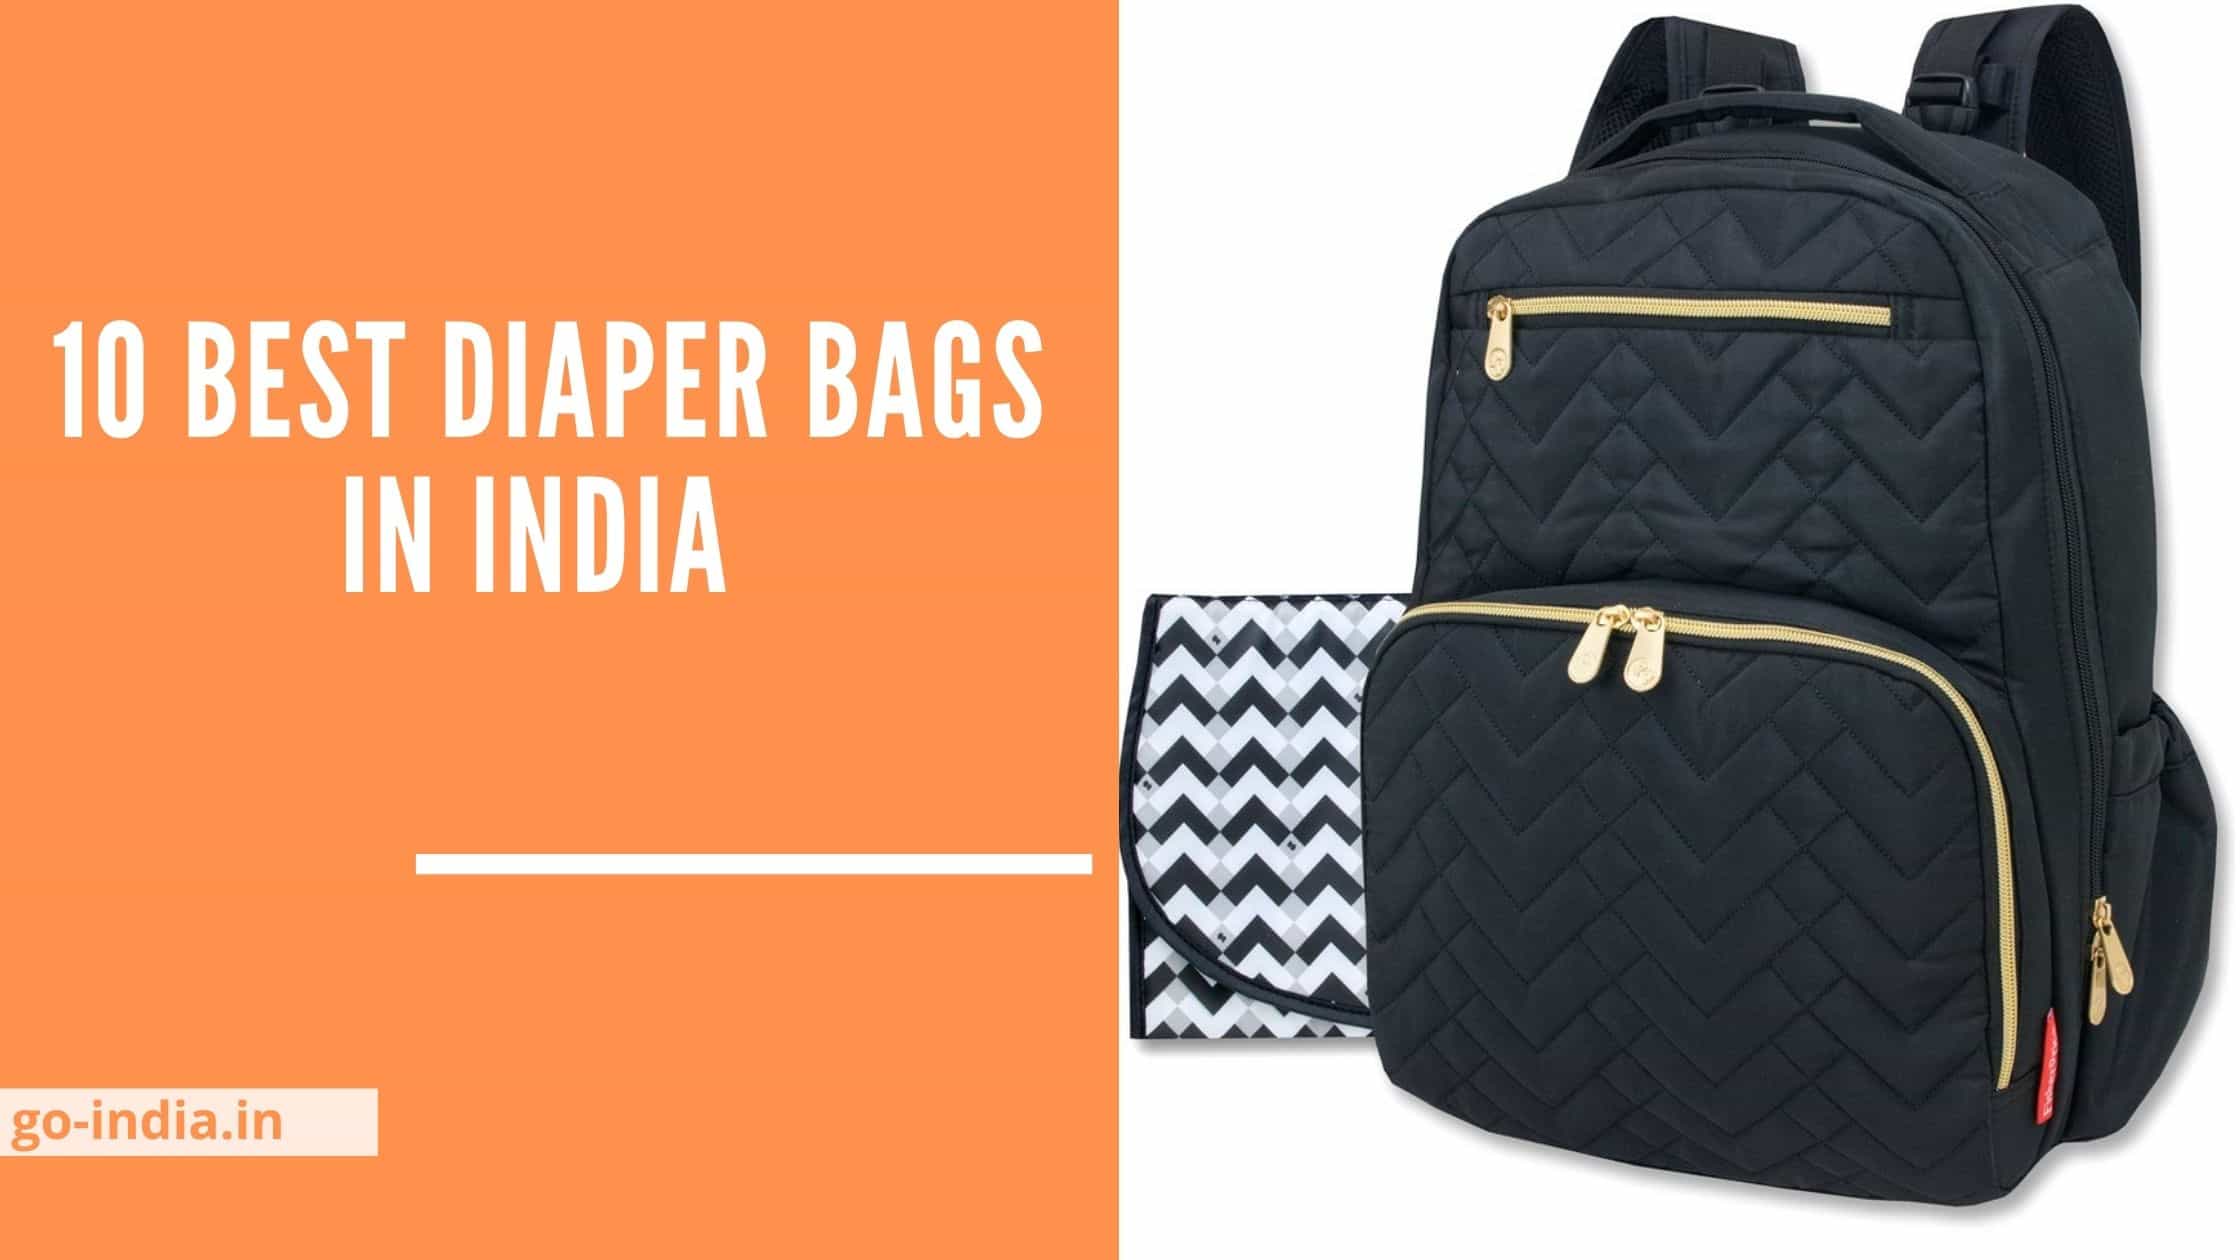 10 Best Diaper Bags in India 2021 – Reviews & Buying Guide